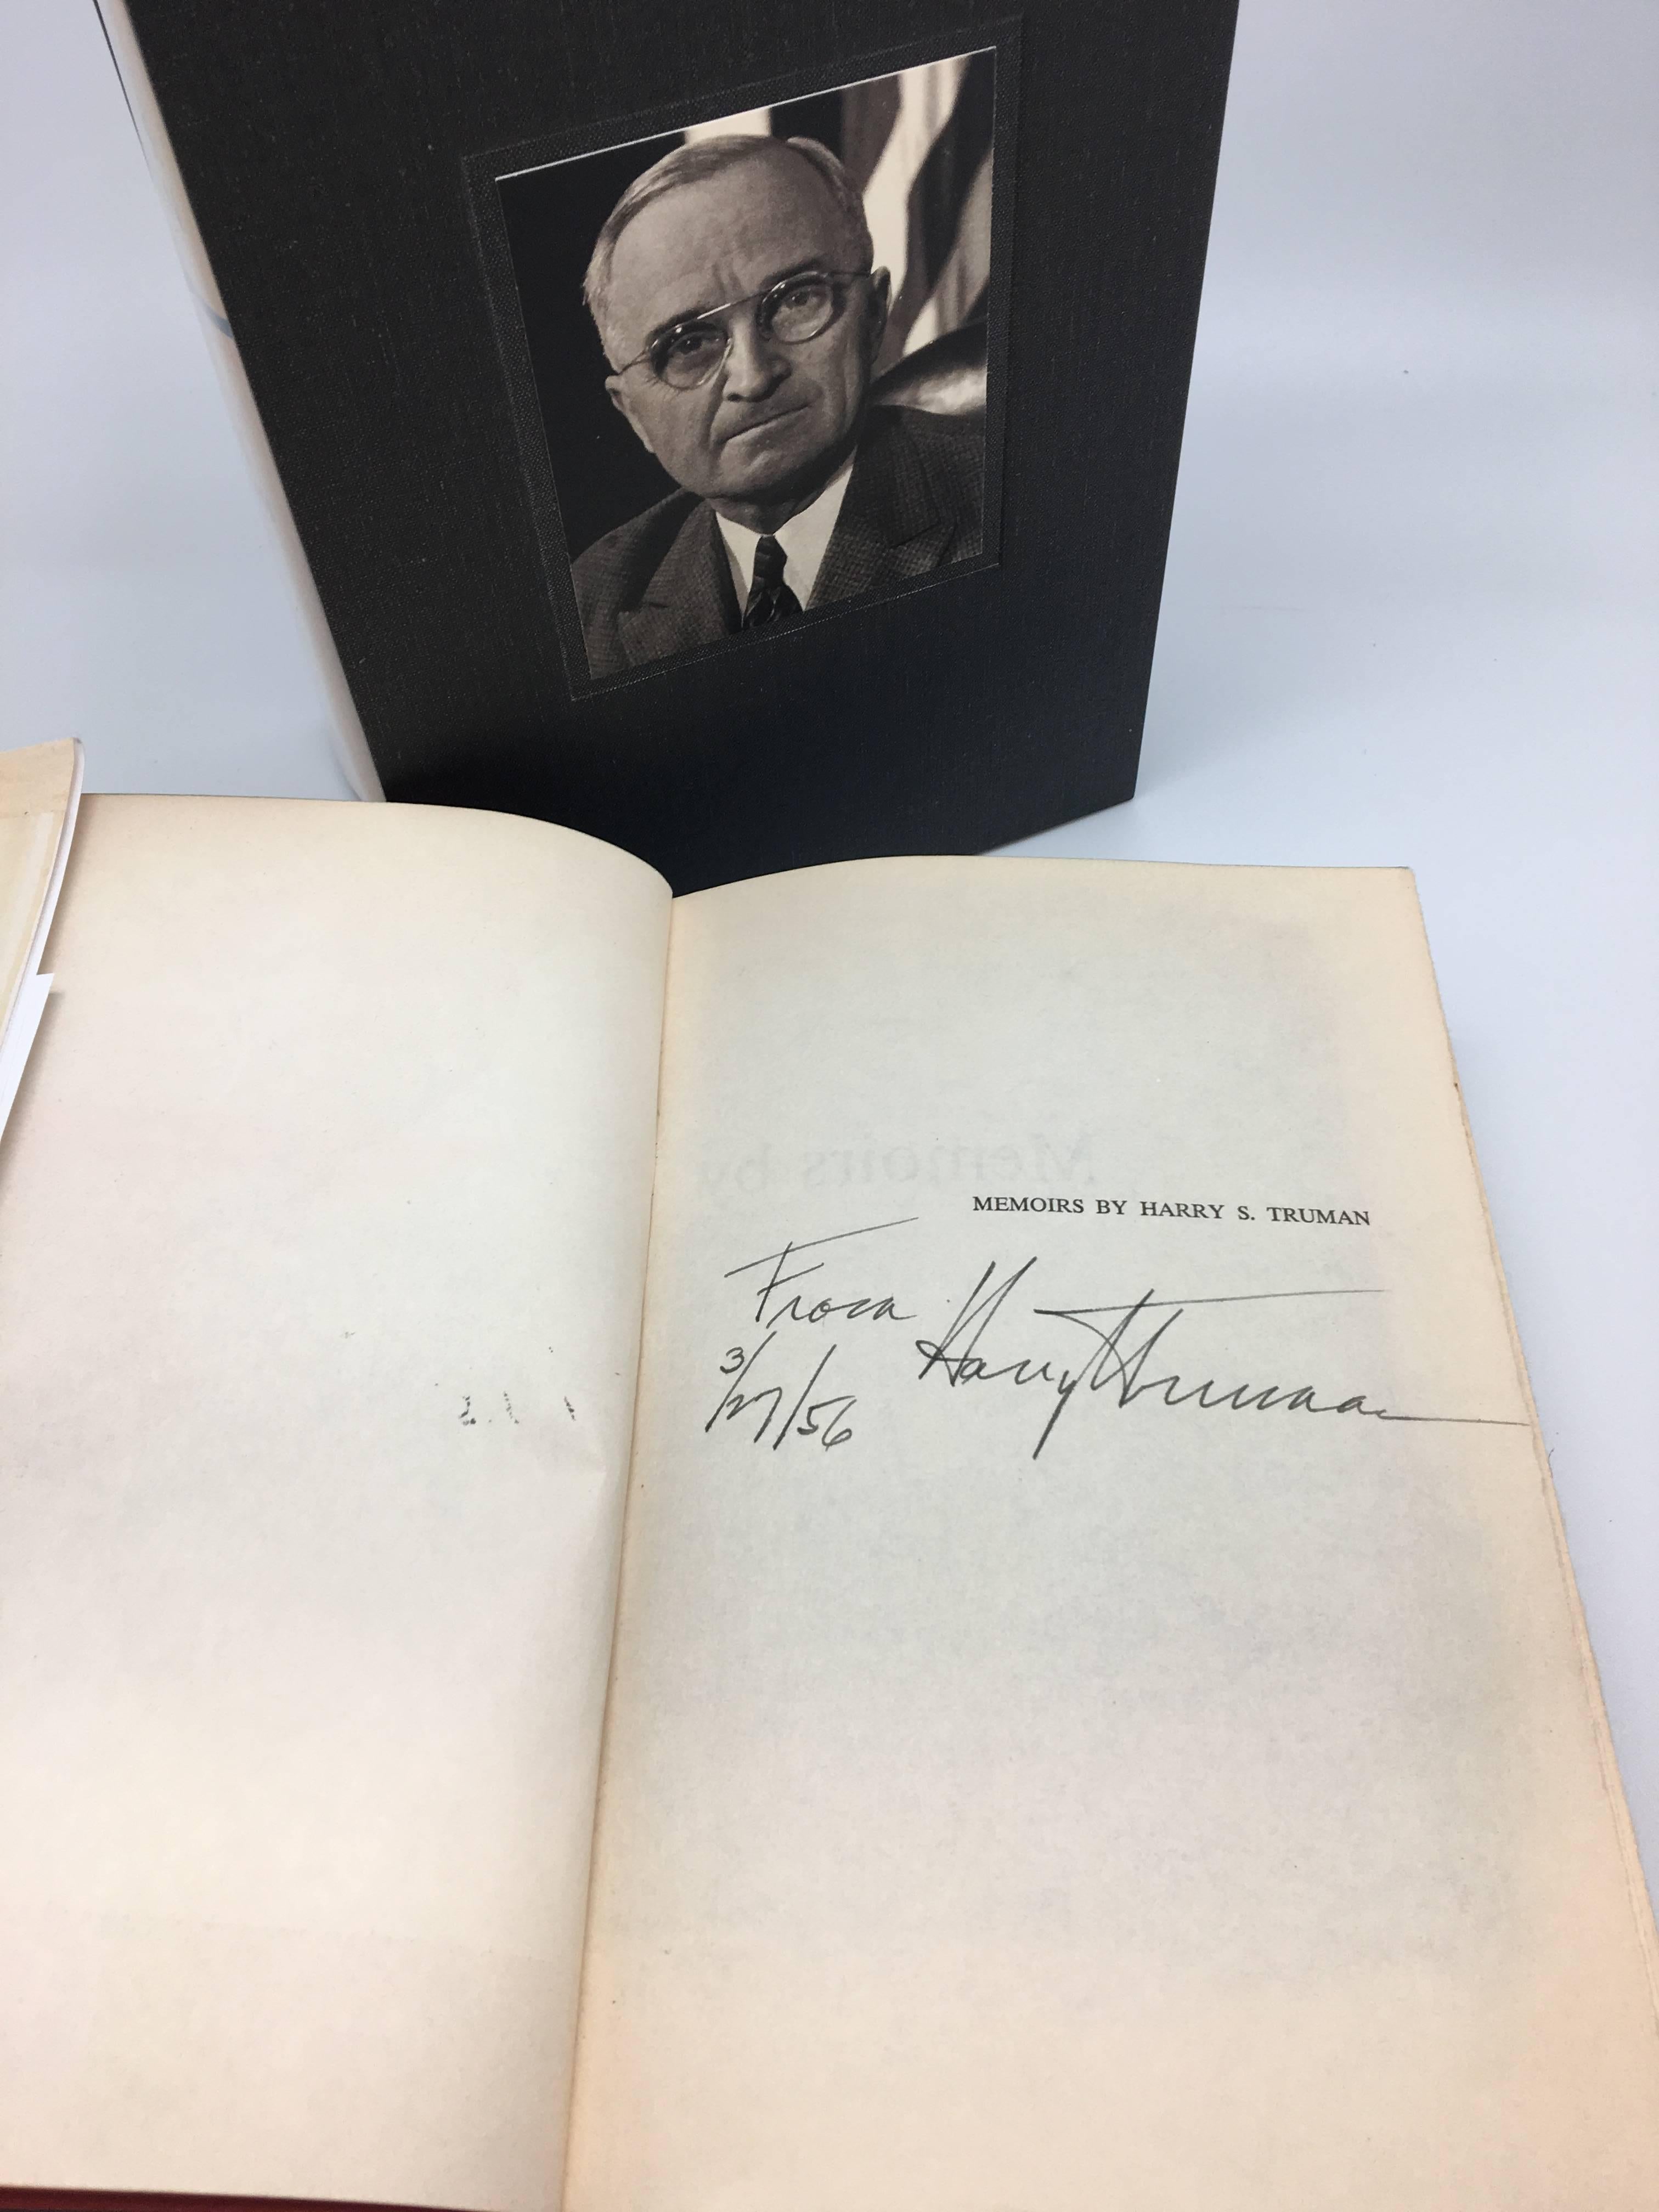 President Harry Truman's Memoirs: Year of Decisions and Years of Trial and Hope. Two volumes. Octavo, original black cloth, original dust jackets. Housed in a decorative cloth slipcase with a photograph of America's 33rd President on the